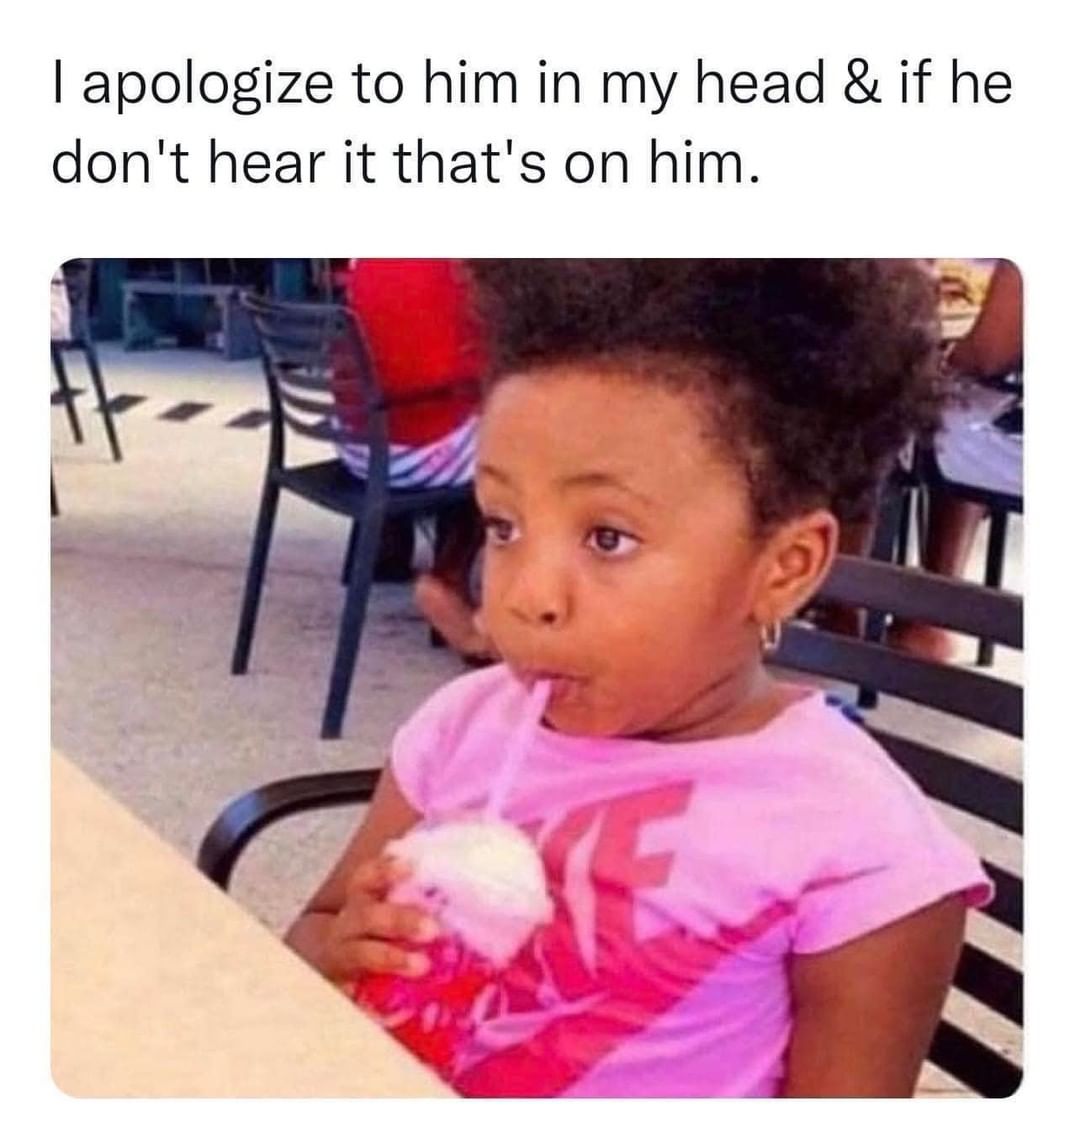 I apologize to him in my head & if he don't hear it that's on him. - Funny